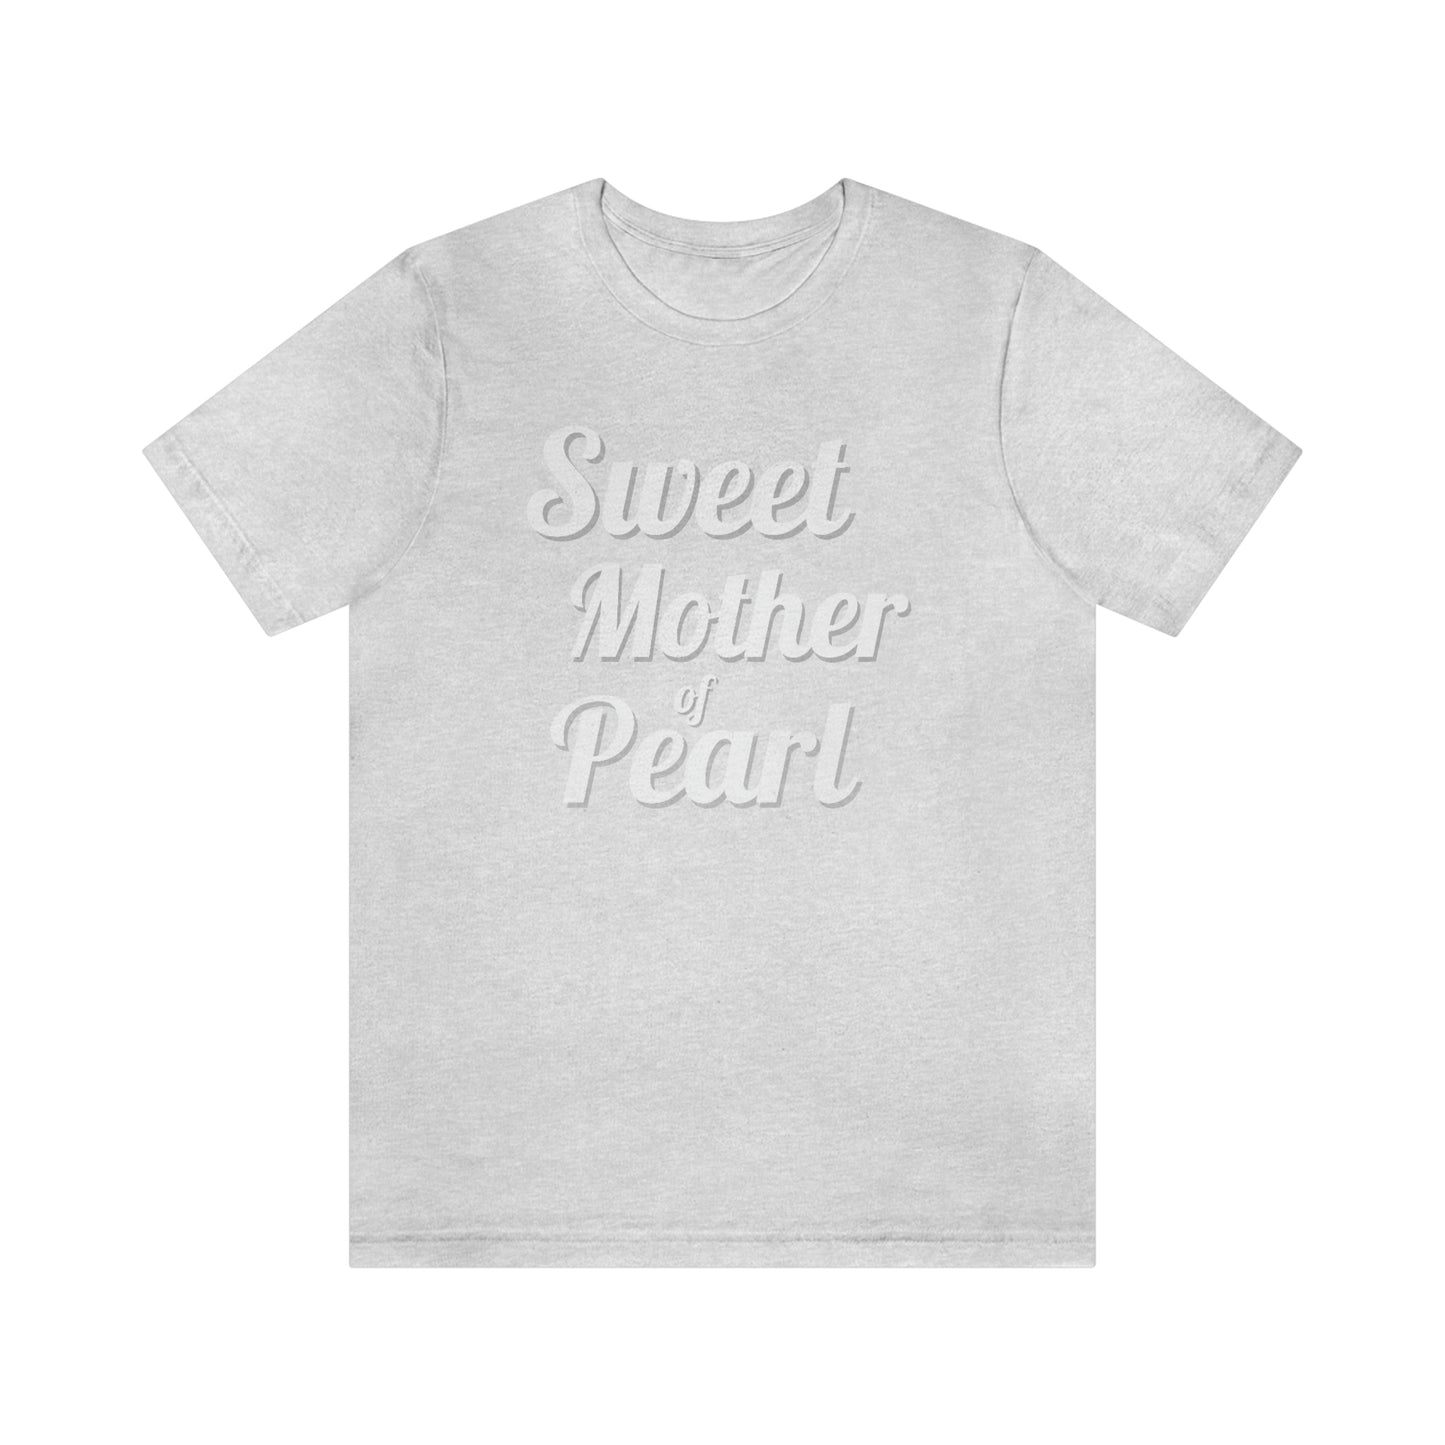 "Sweet Mother of Pearl" Unisex Ultra Cotton Tee